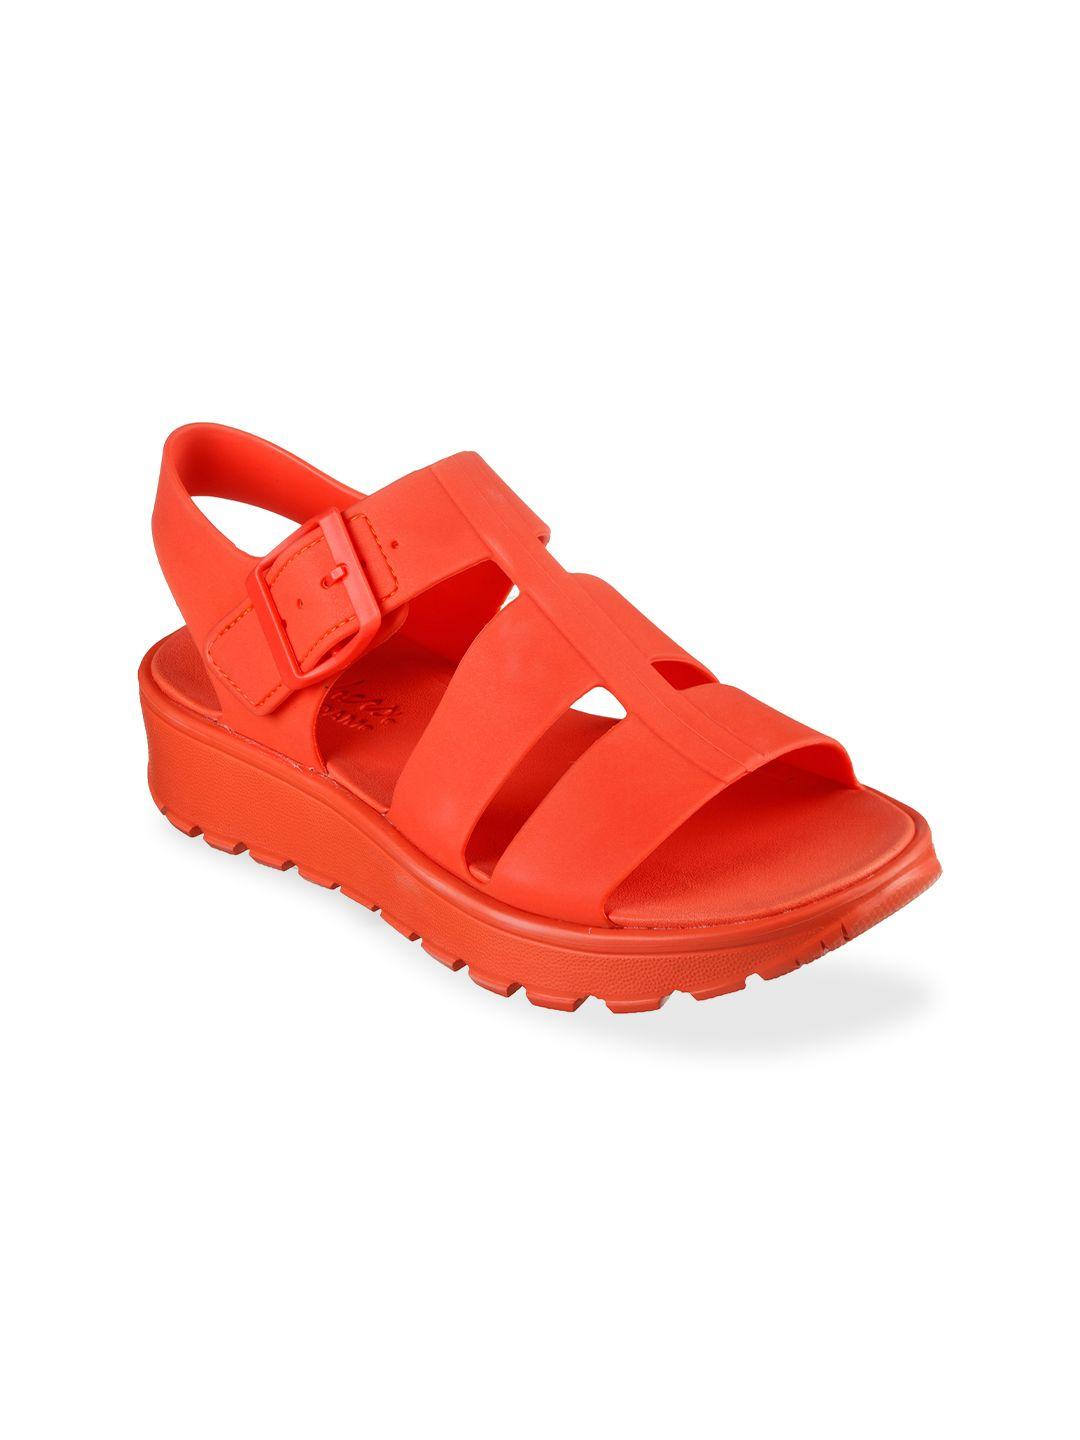 skechers women red solid buckled sports sandals